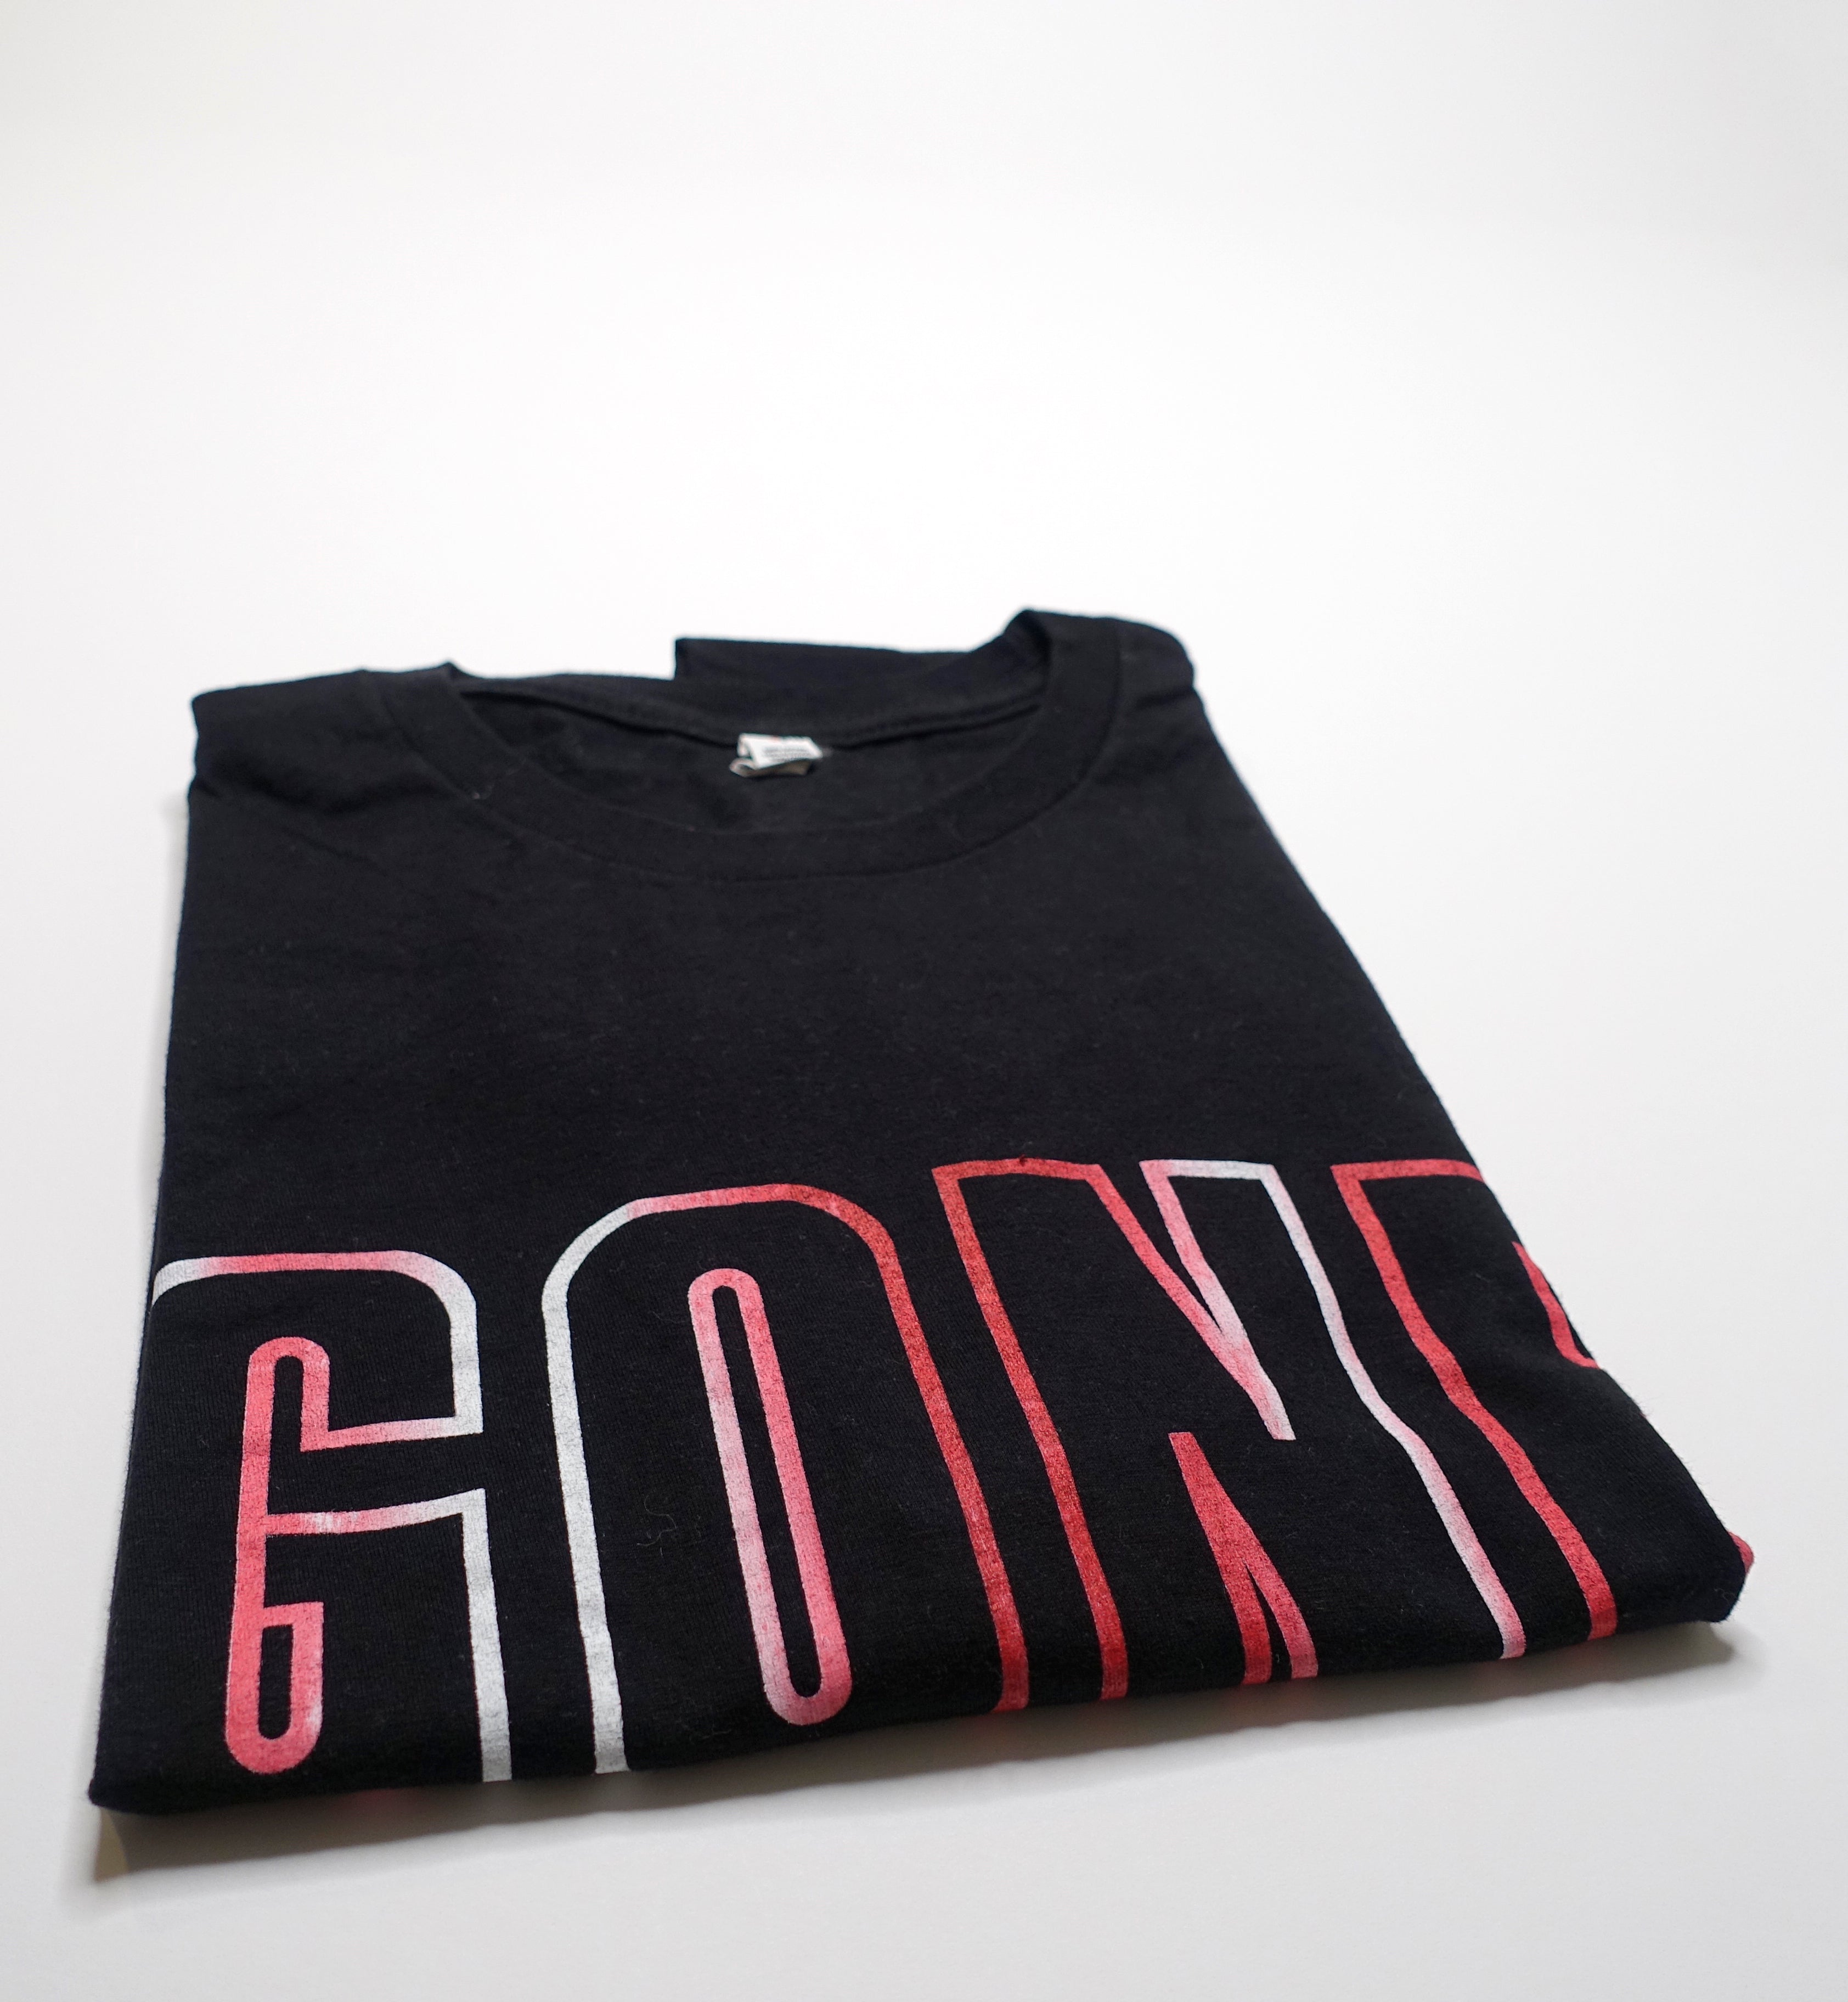 Gone – Let's Get Real Gone Shirt Size Large (Bootleg By Me)